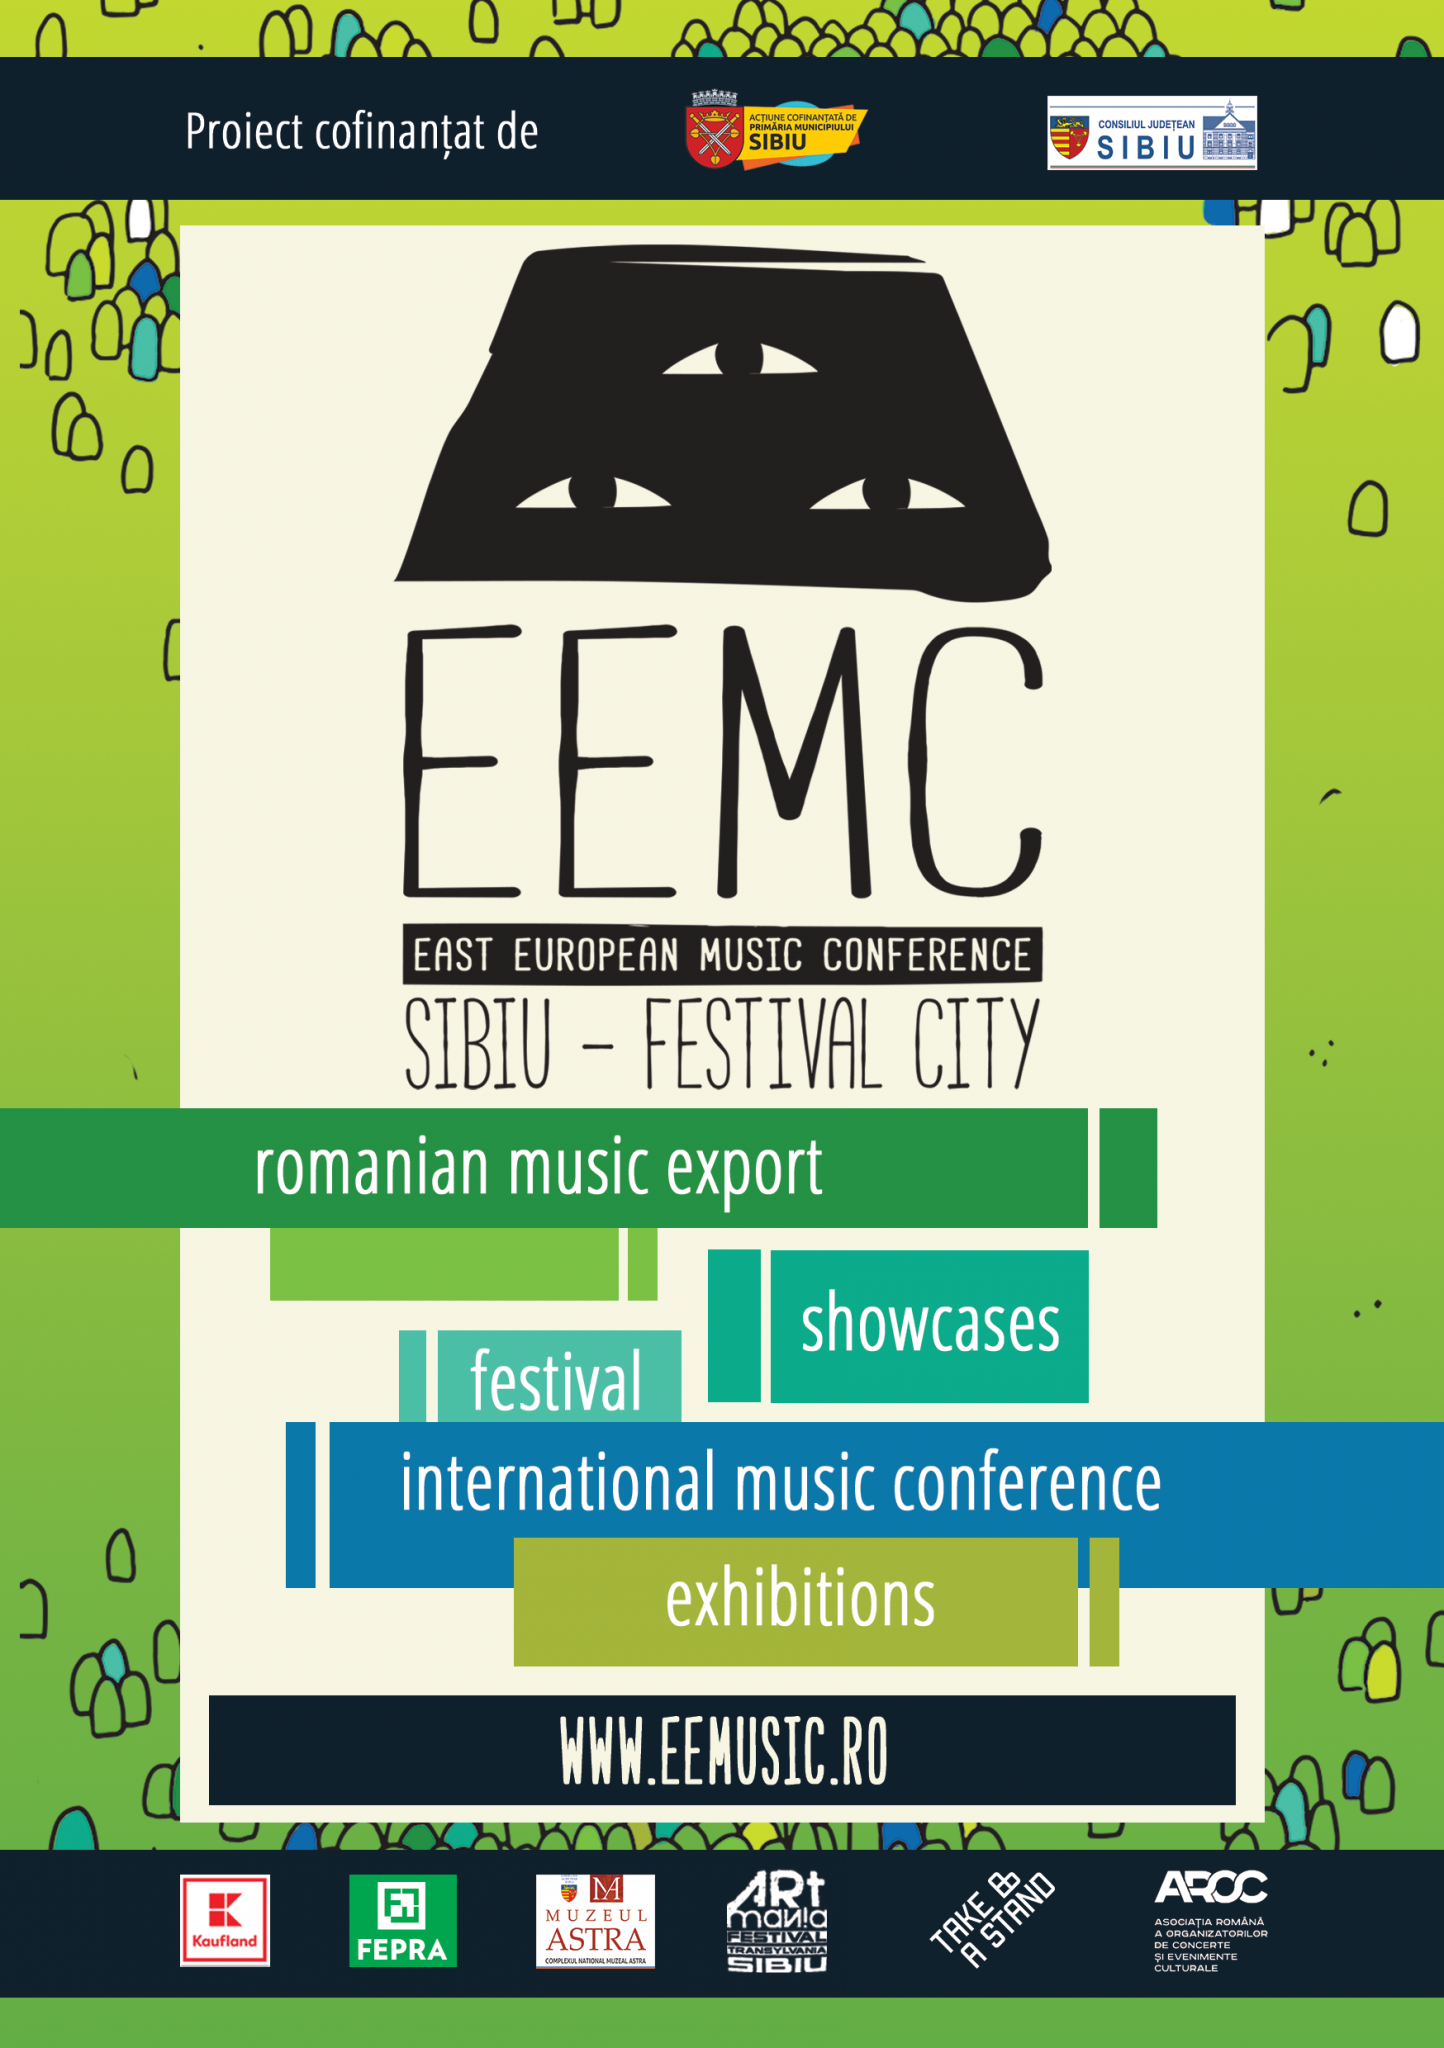 Call for bands: Register your band for Romanian Music Export!